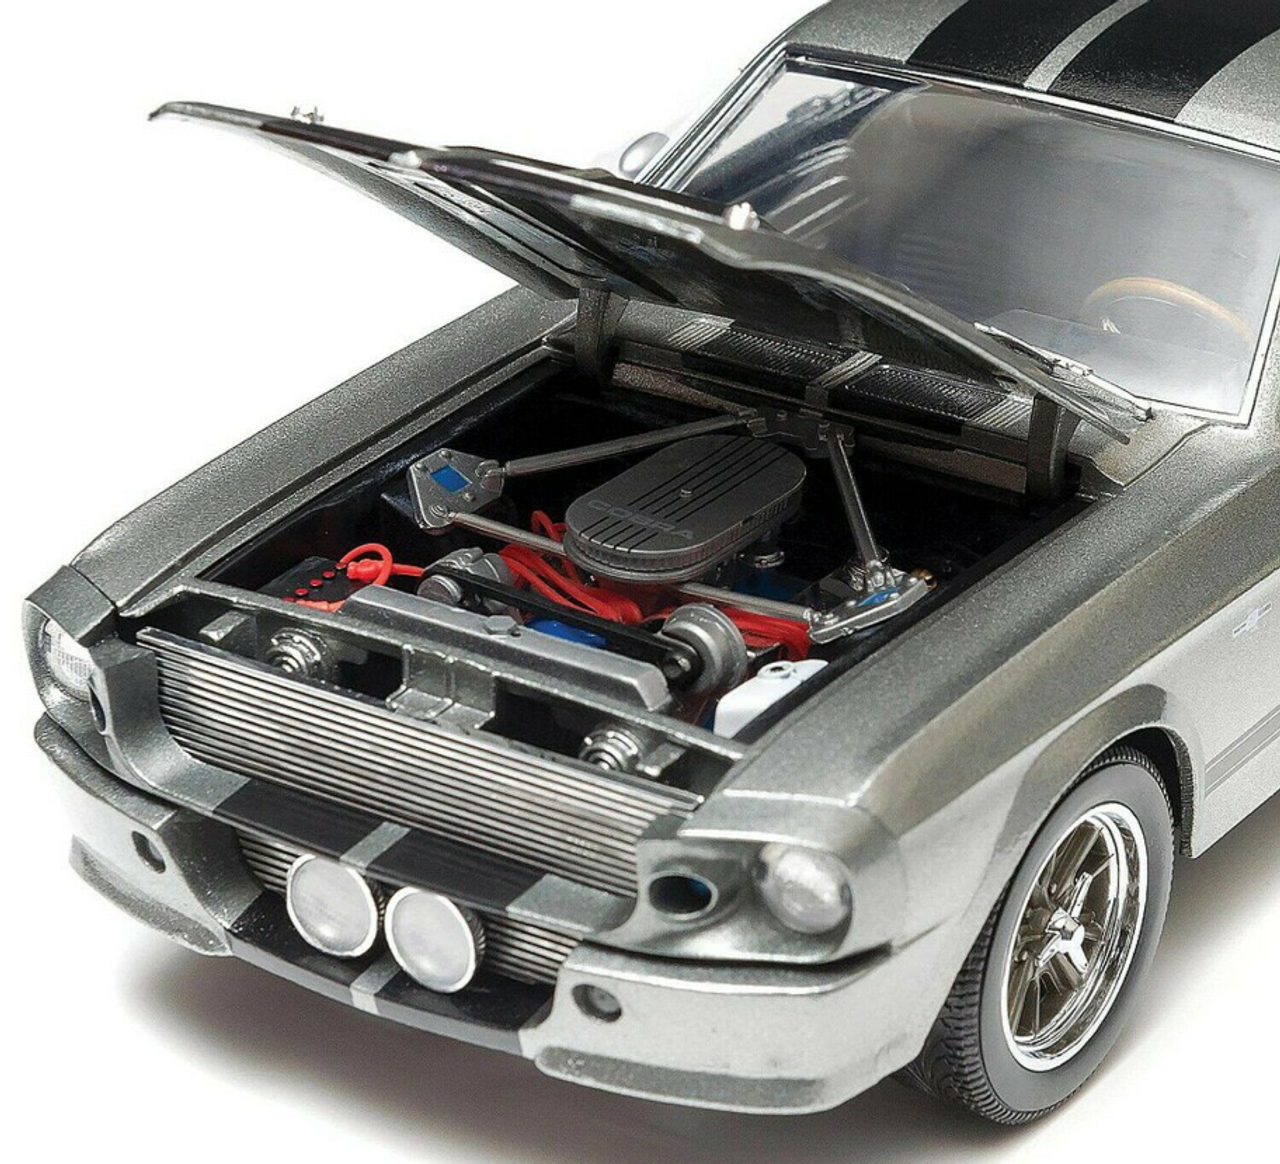 1/18 Greenlight 1967 Ford Mustang Custom "Eleanor" "Gone in 60 Seconds" (2000) Movie Diecast Car Model